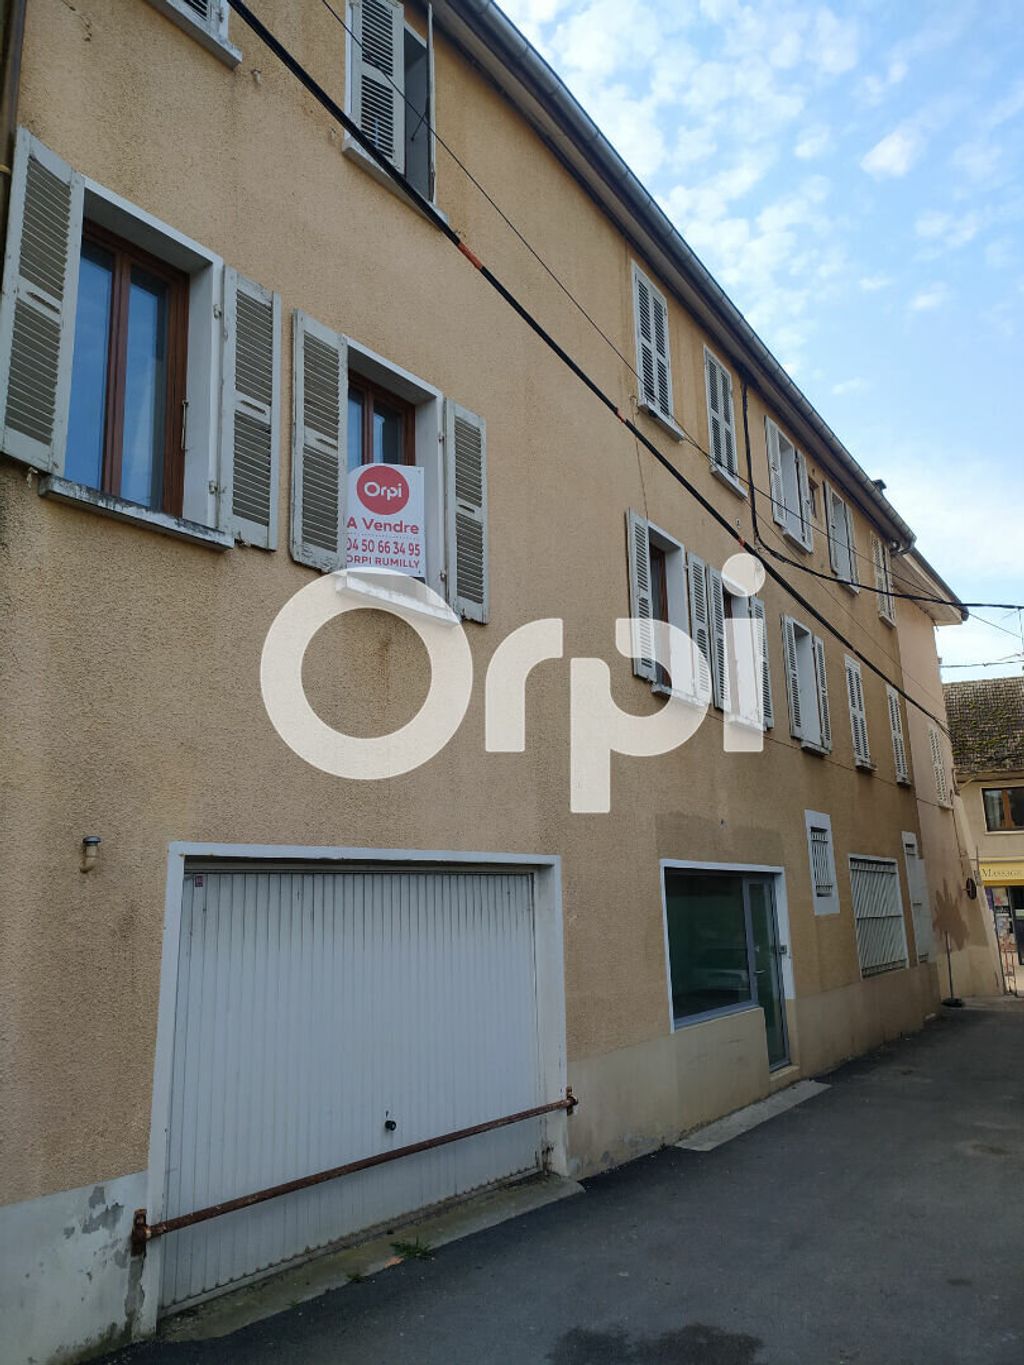 Achat appartement 3 pièces 55 m² - Rumilly